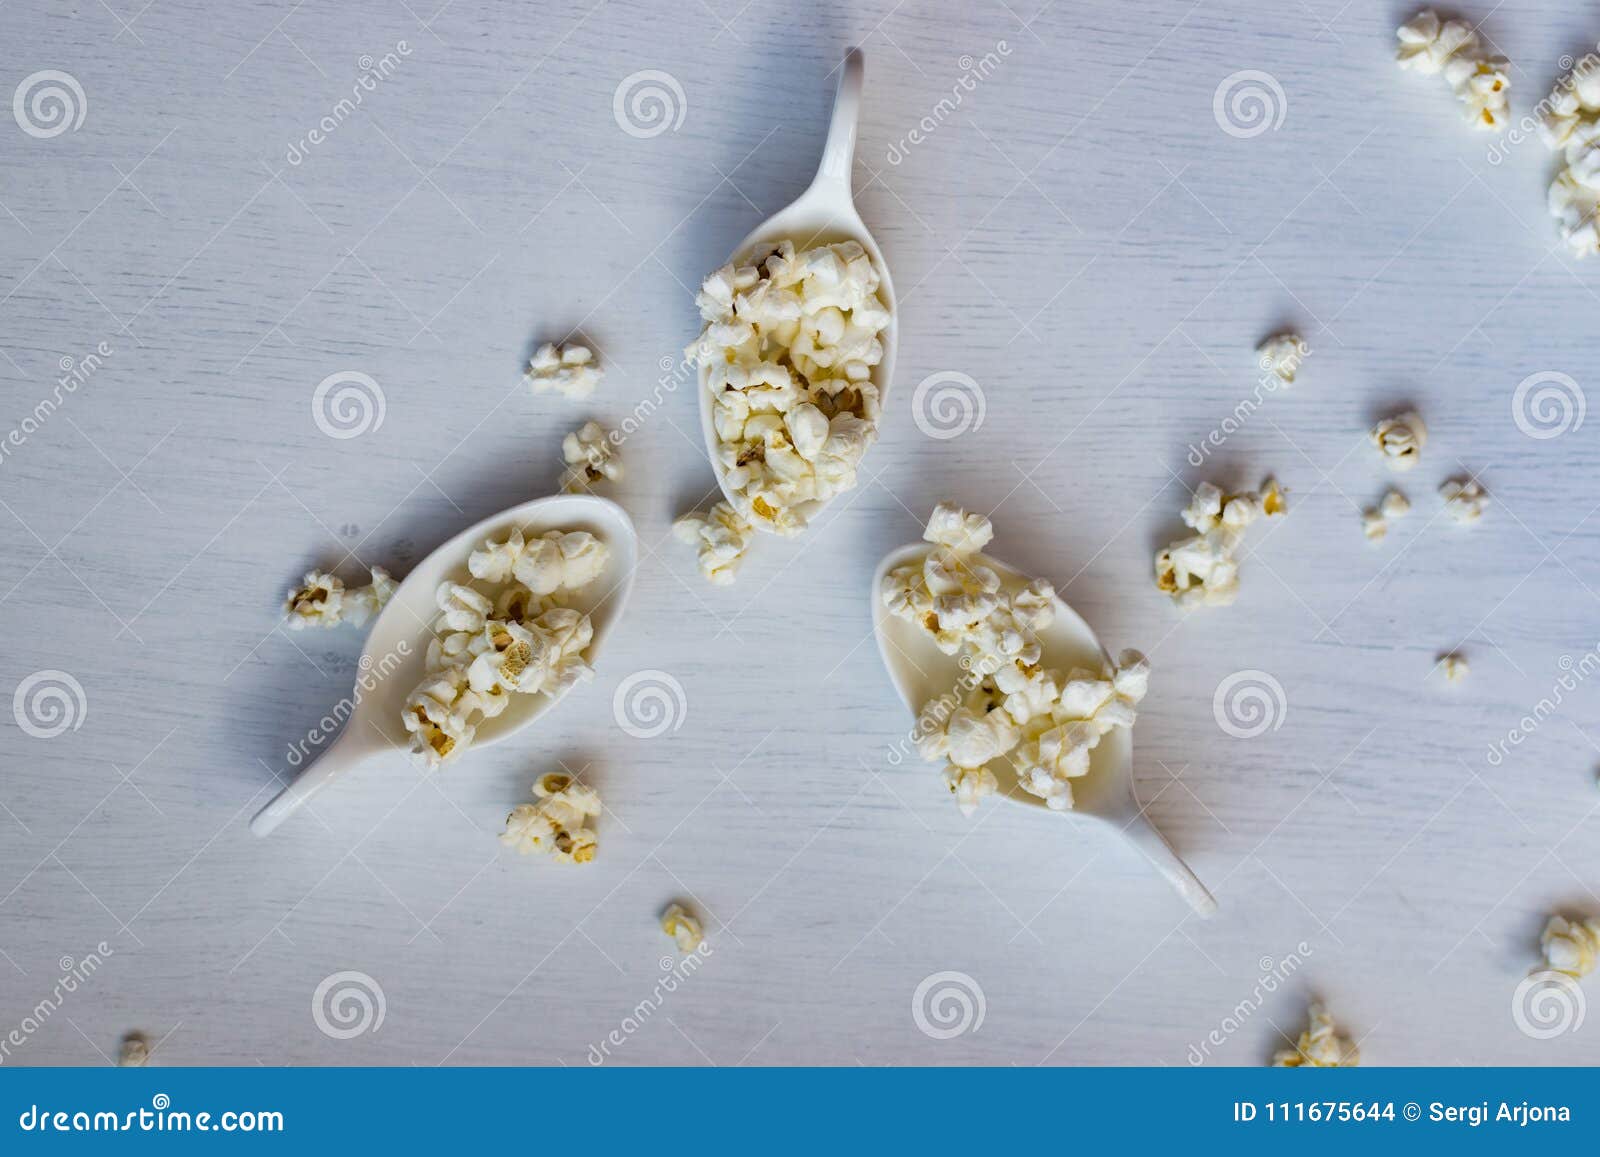 white spoon with popcorn.